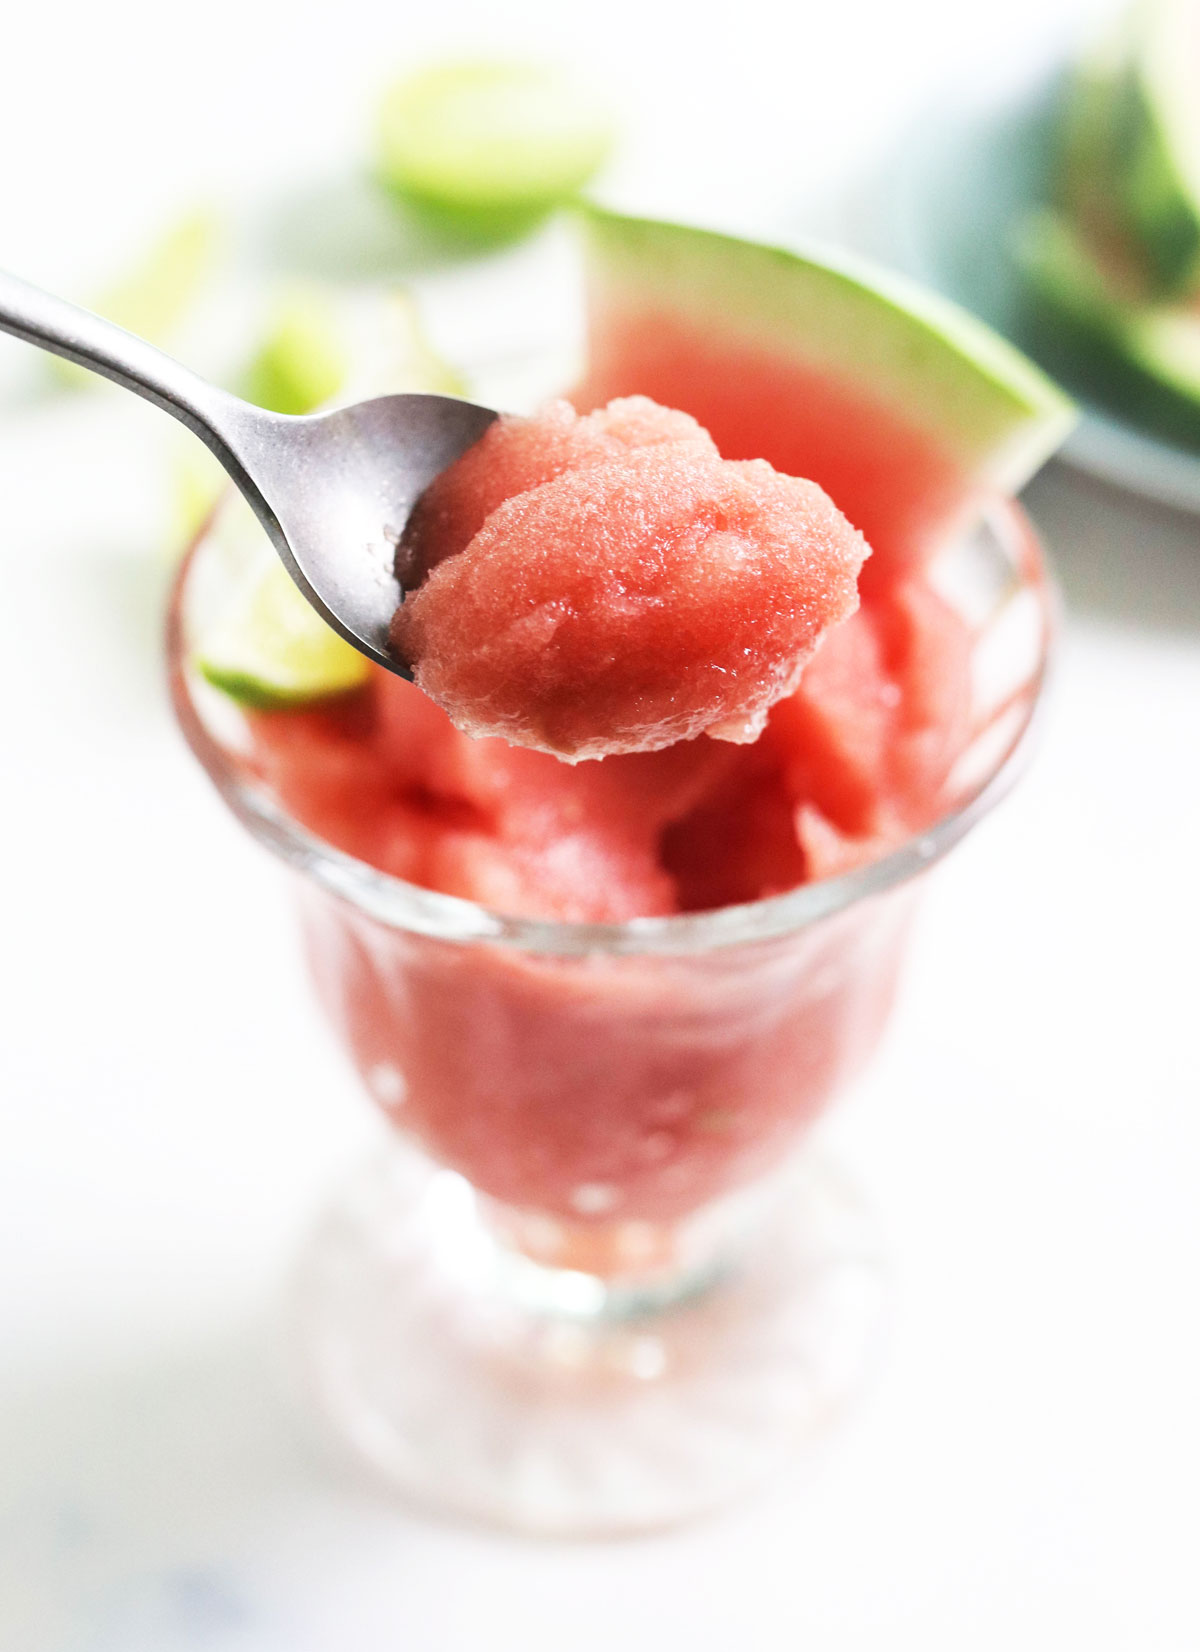 spoonful of sorbet from glass